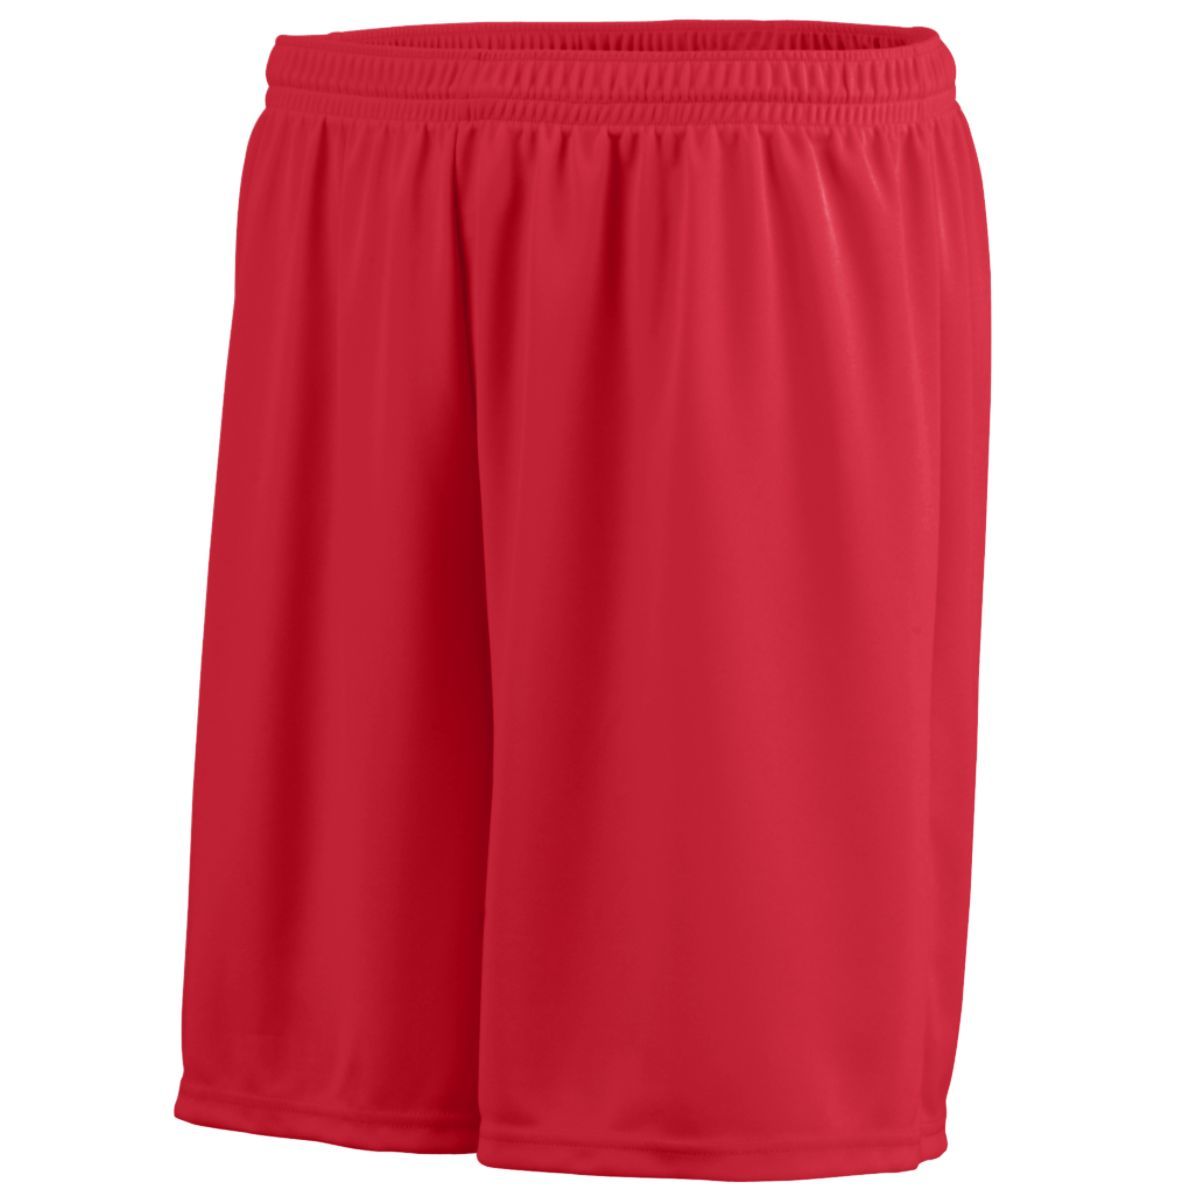 Augusta Sportswear Octane Shorts in Red  -Part of the Adult, Adult-Shorts, Augusta-Products product lines at KanaleyCreations.com